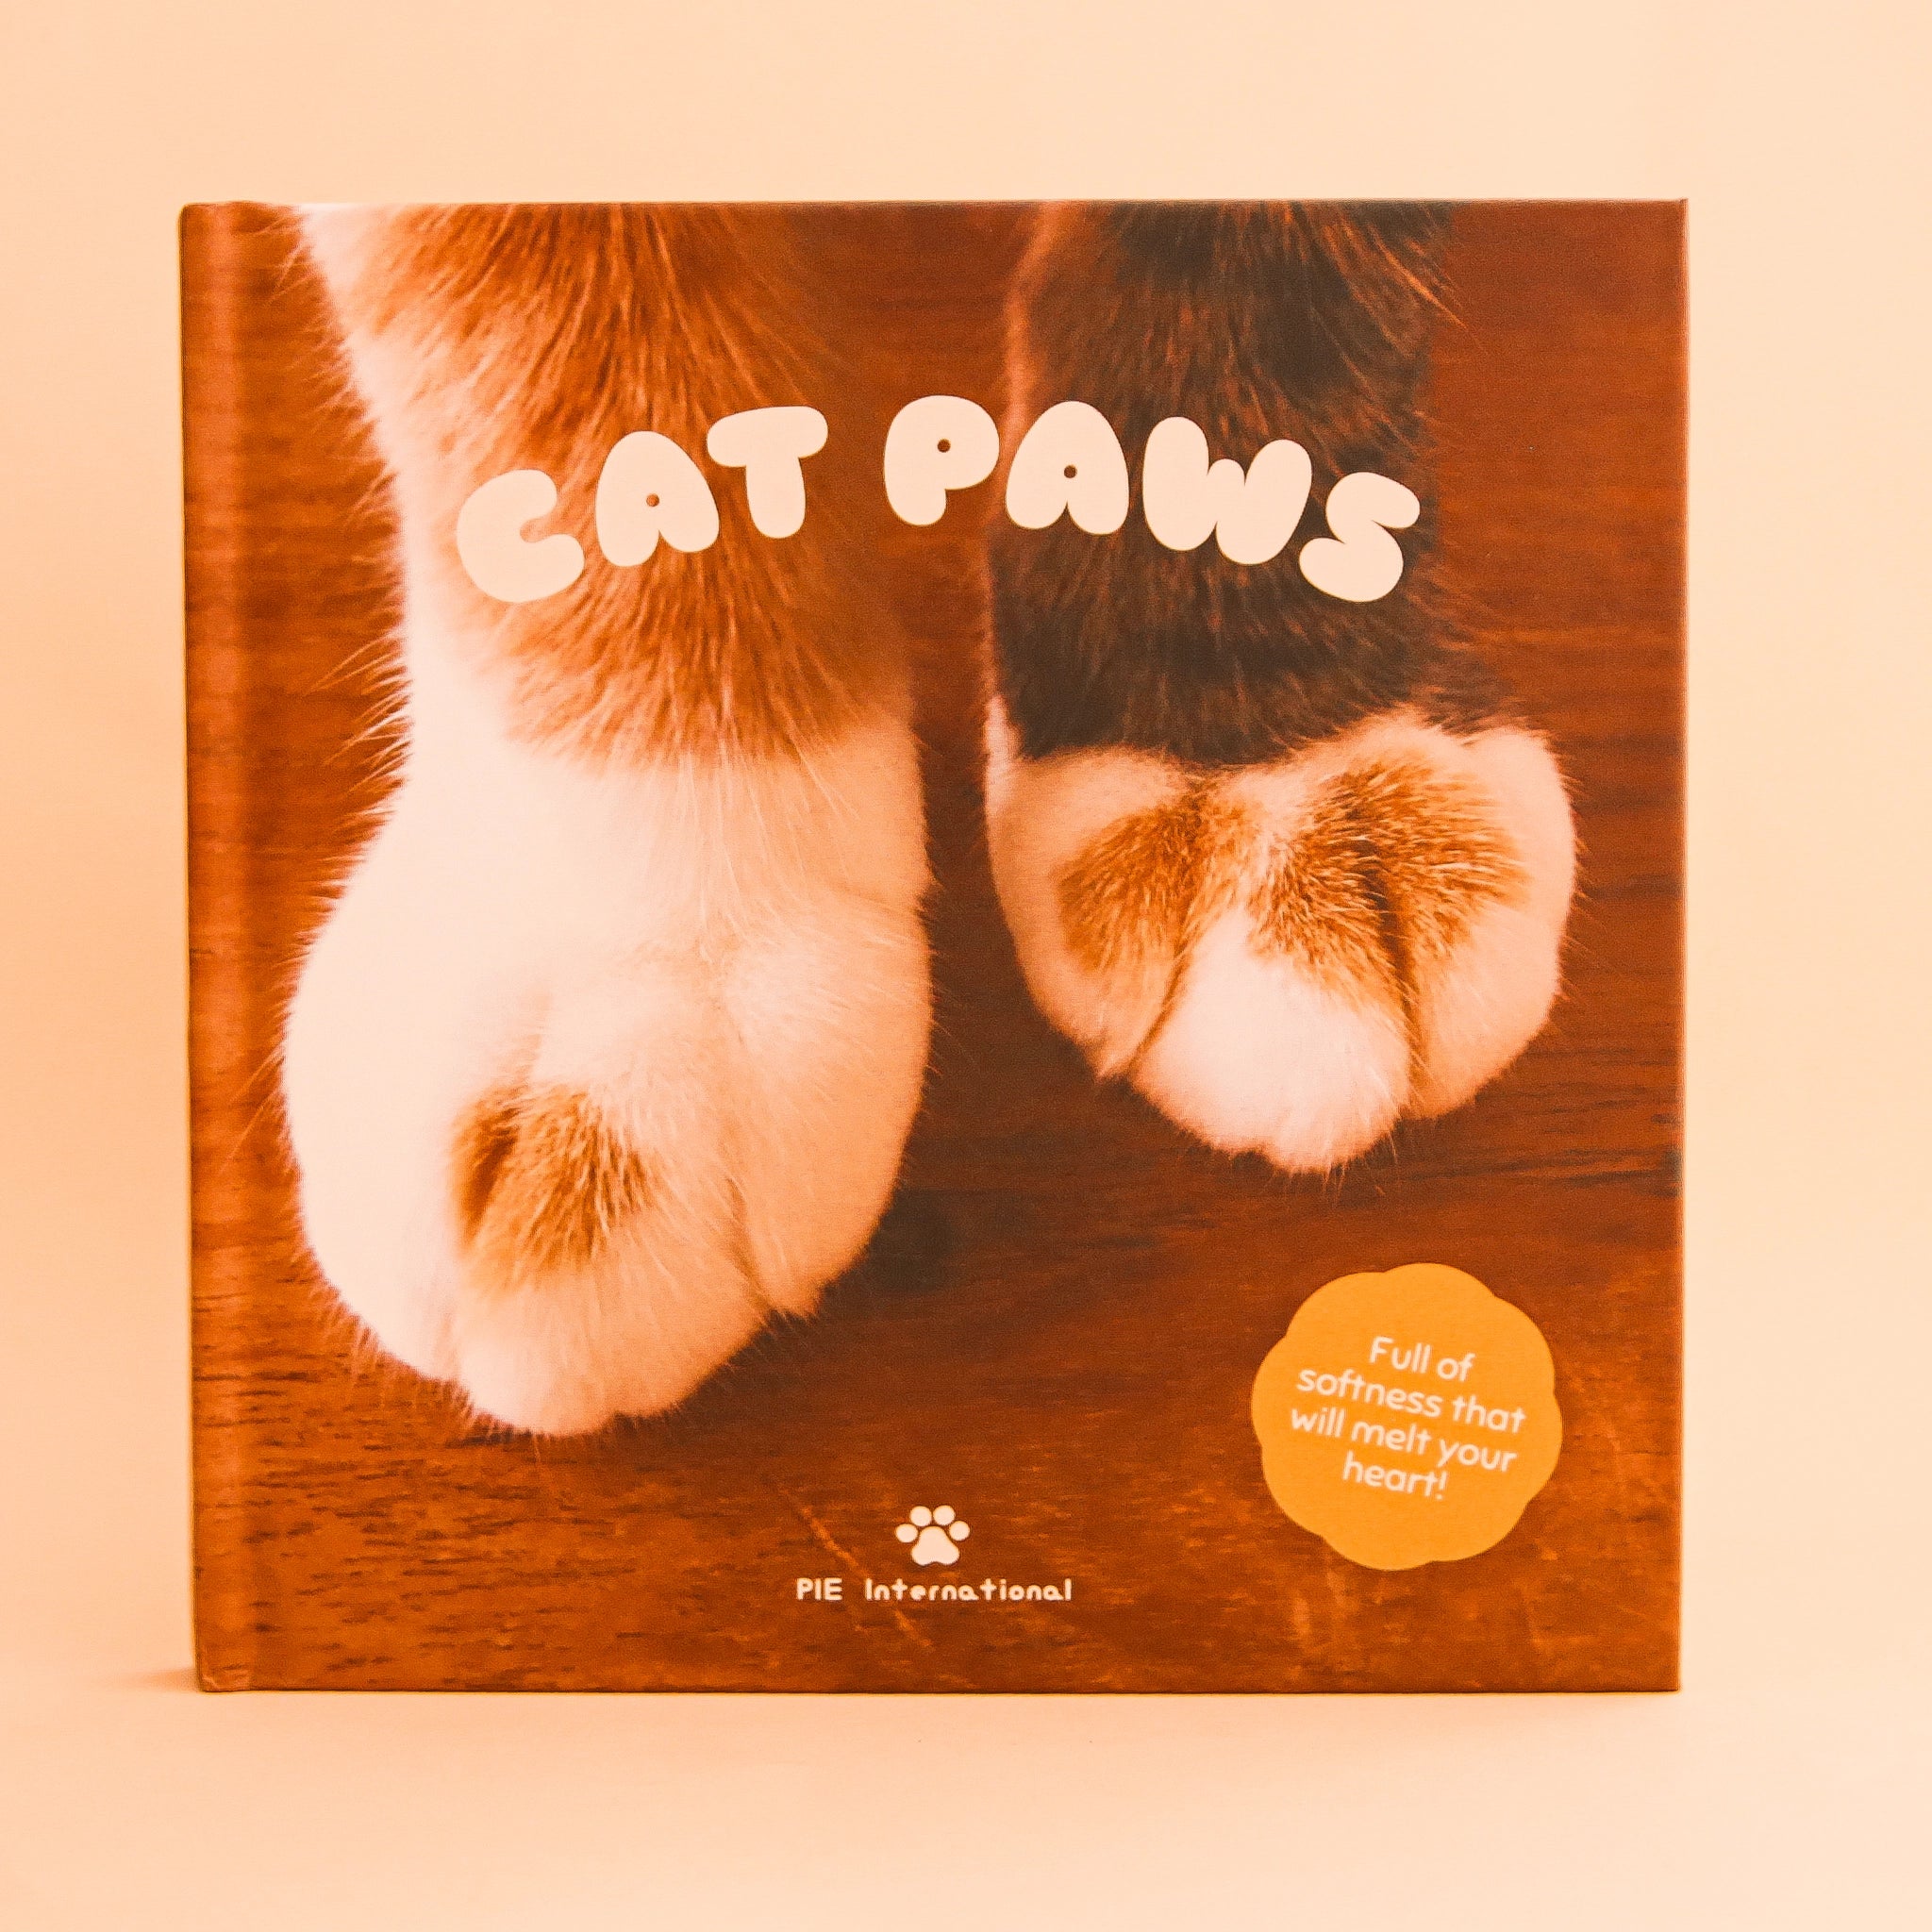 On a peach background is a book cover featuring a photograph of cat paws against a wood floor along with the title, "Cat Paws", "Full of softness that will melt your heart!".